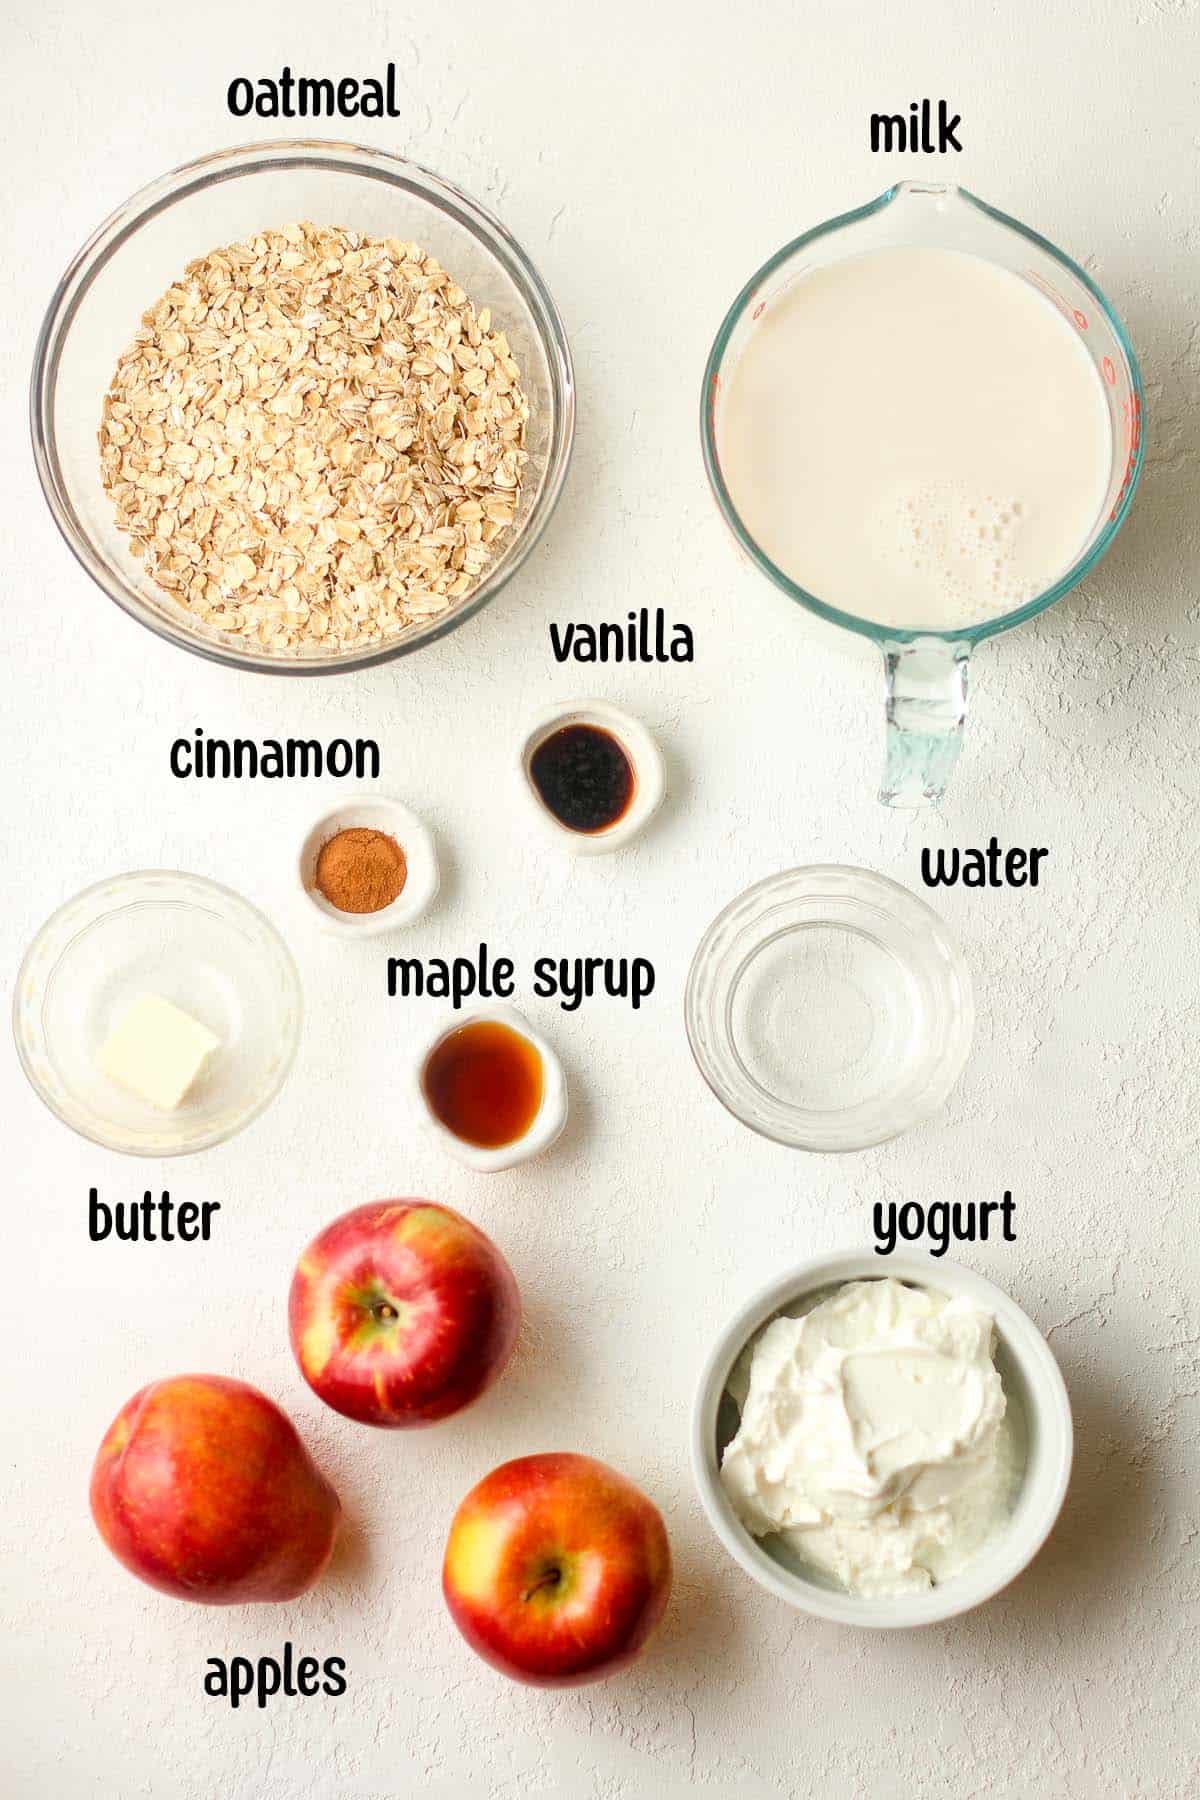 The ingredients needed for the apple overnight oats.